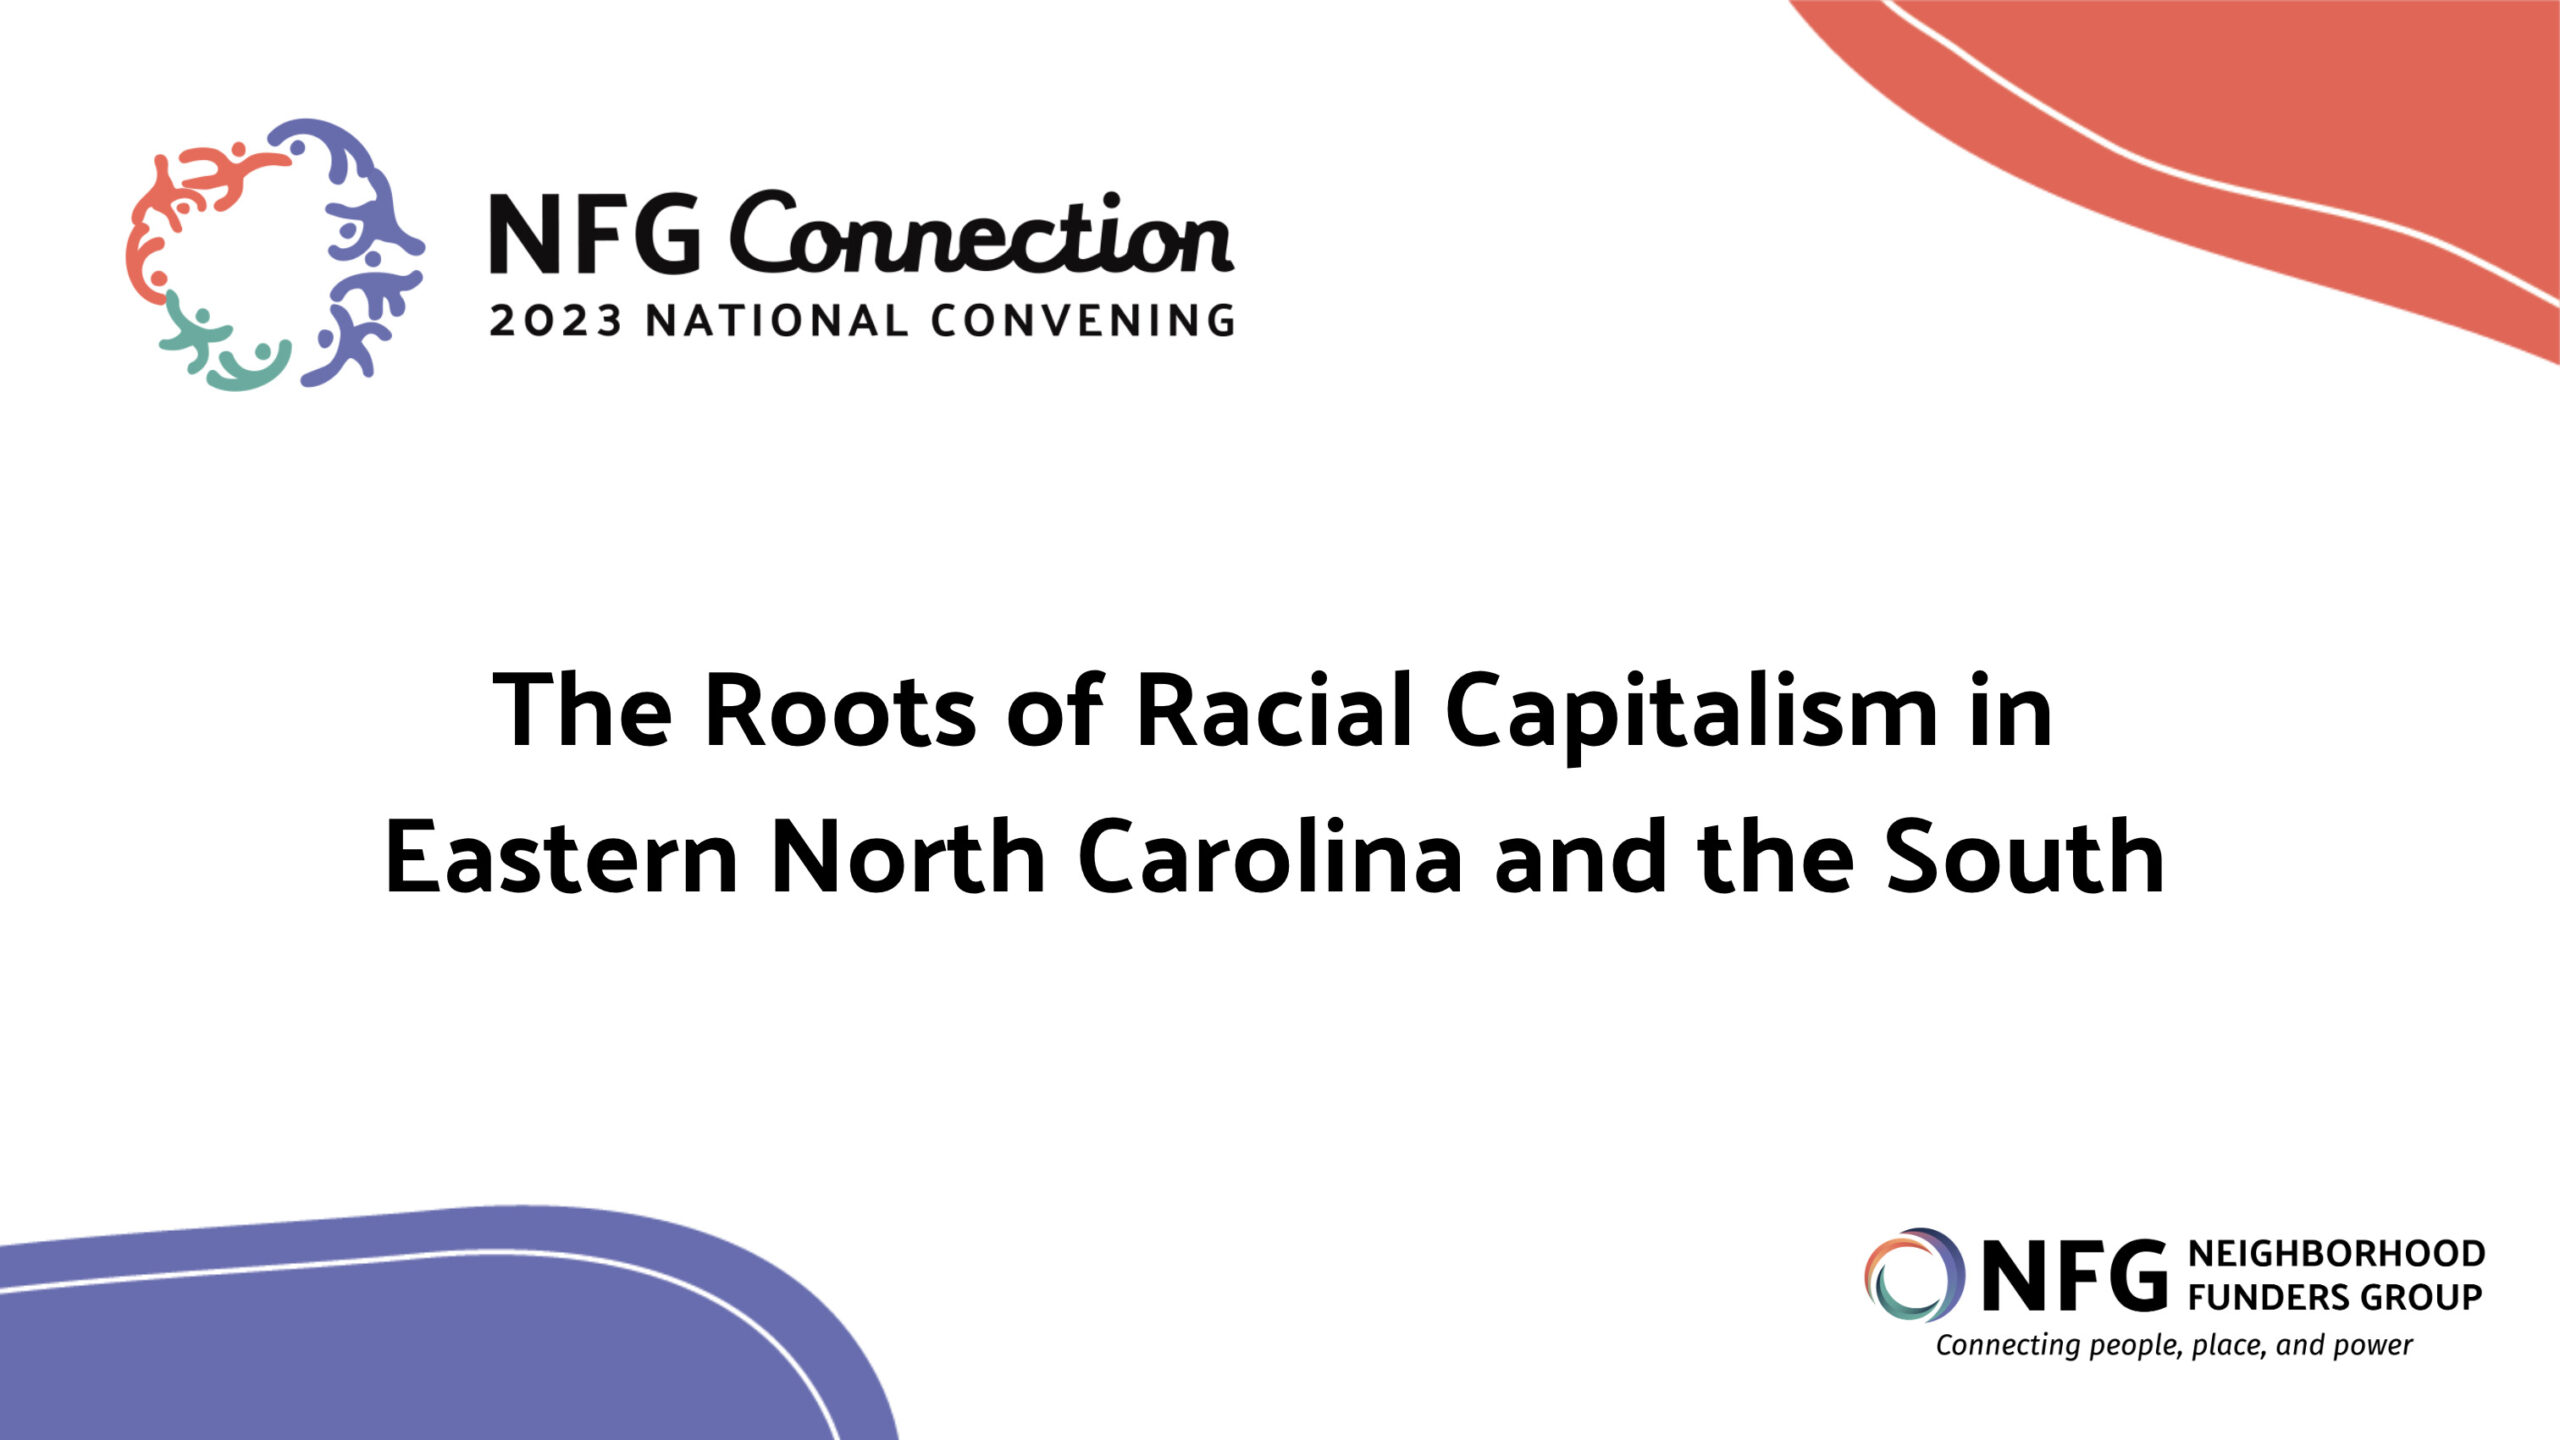 Title card for NFG's 2023 National Convening Plenary 1: "The Roots of Racial Capitalism In Eastern North Carolina and the South"